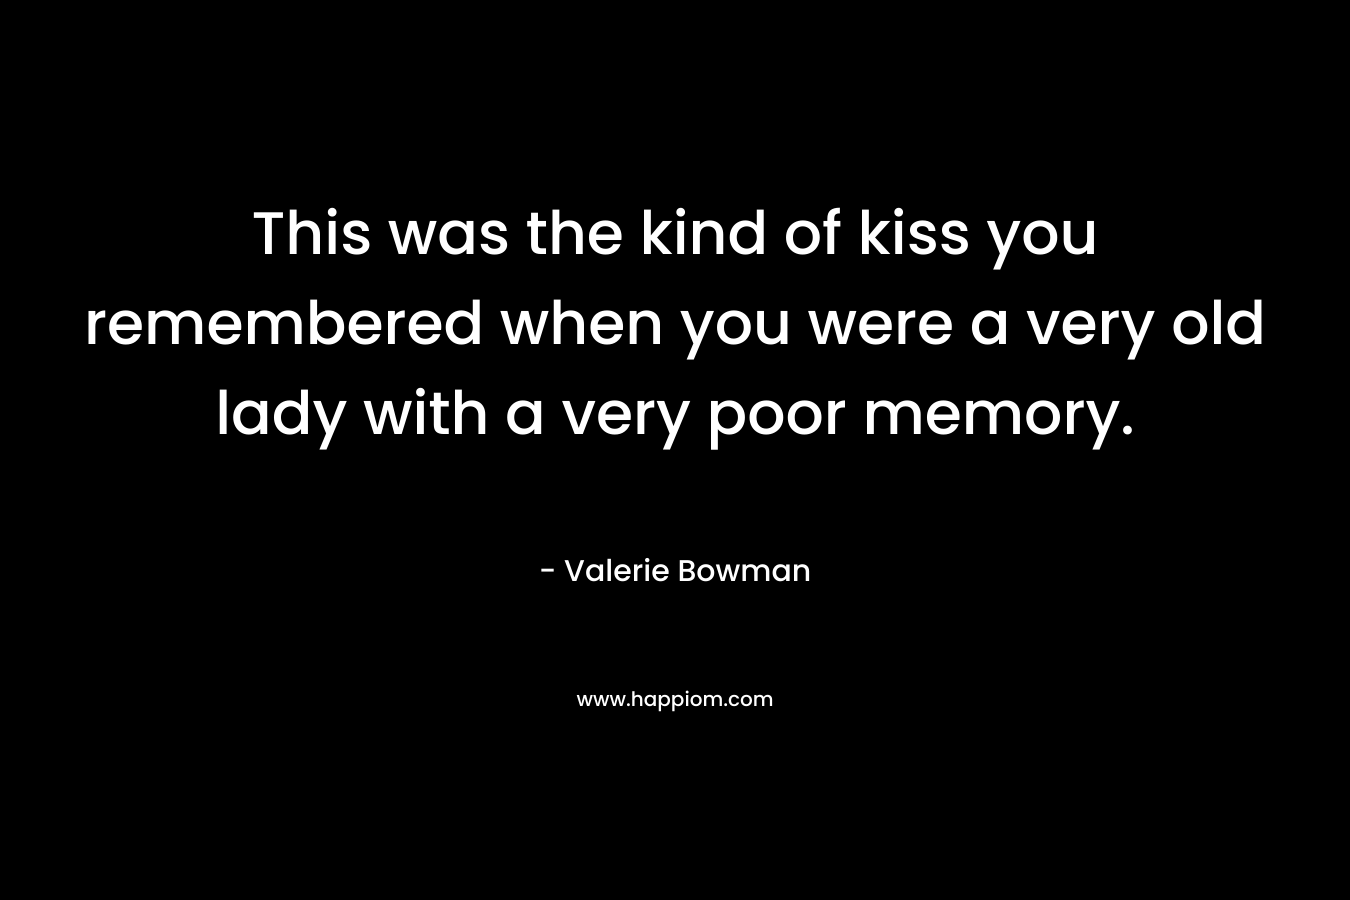 This was the kind of kiss you remembered when you were a very old lady with a very poor memory. – Valerie Bowman